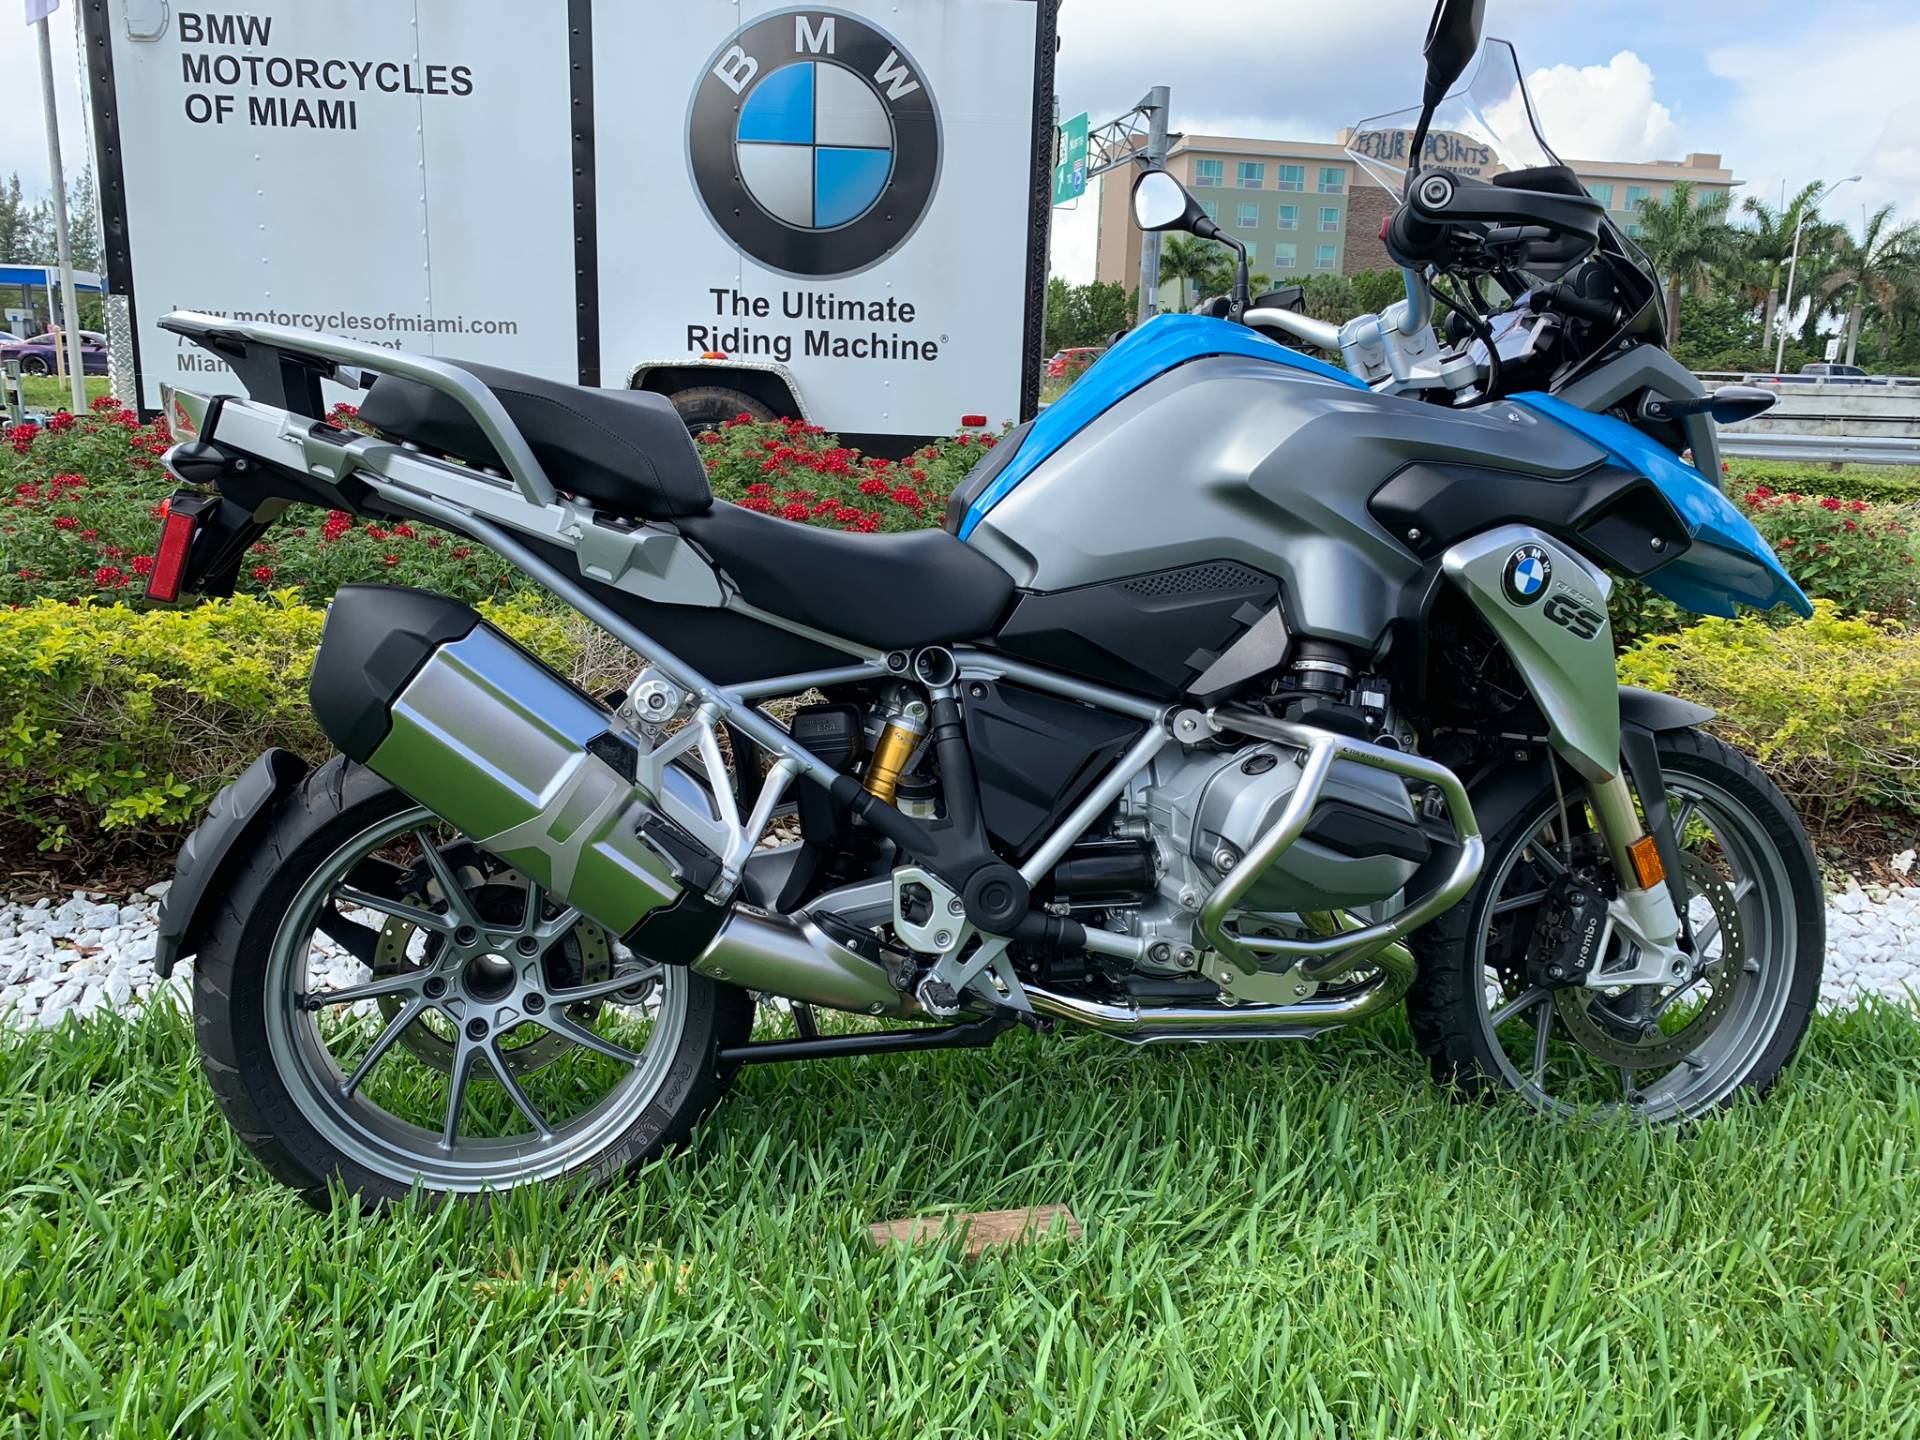 Used 2014 BMW R 1200 GS Motorcycles in Miami, FL